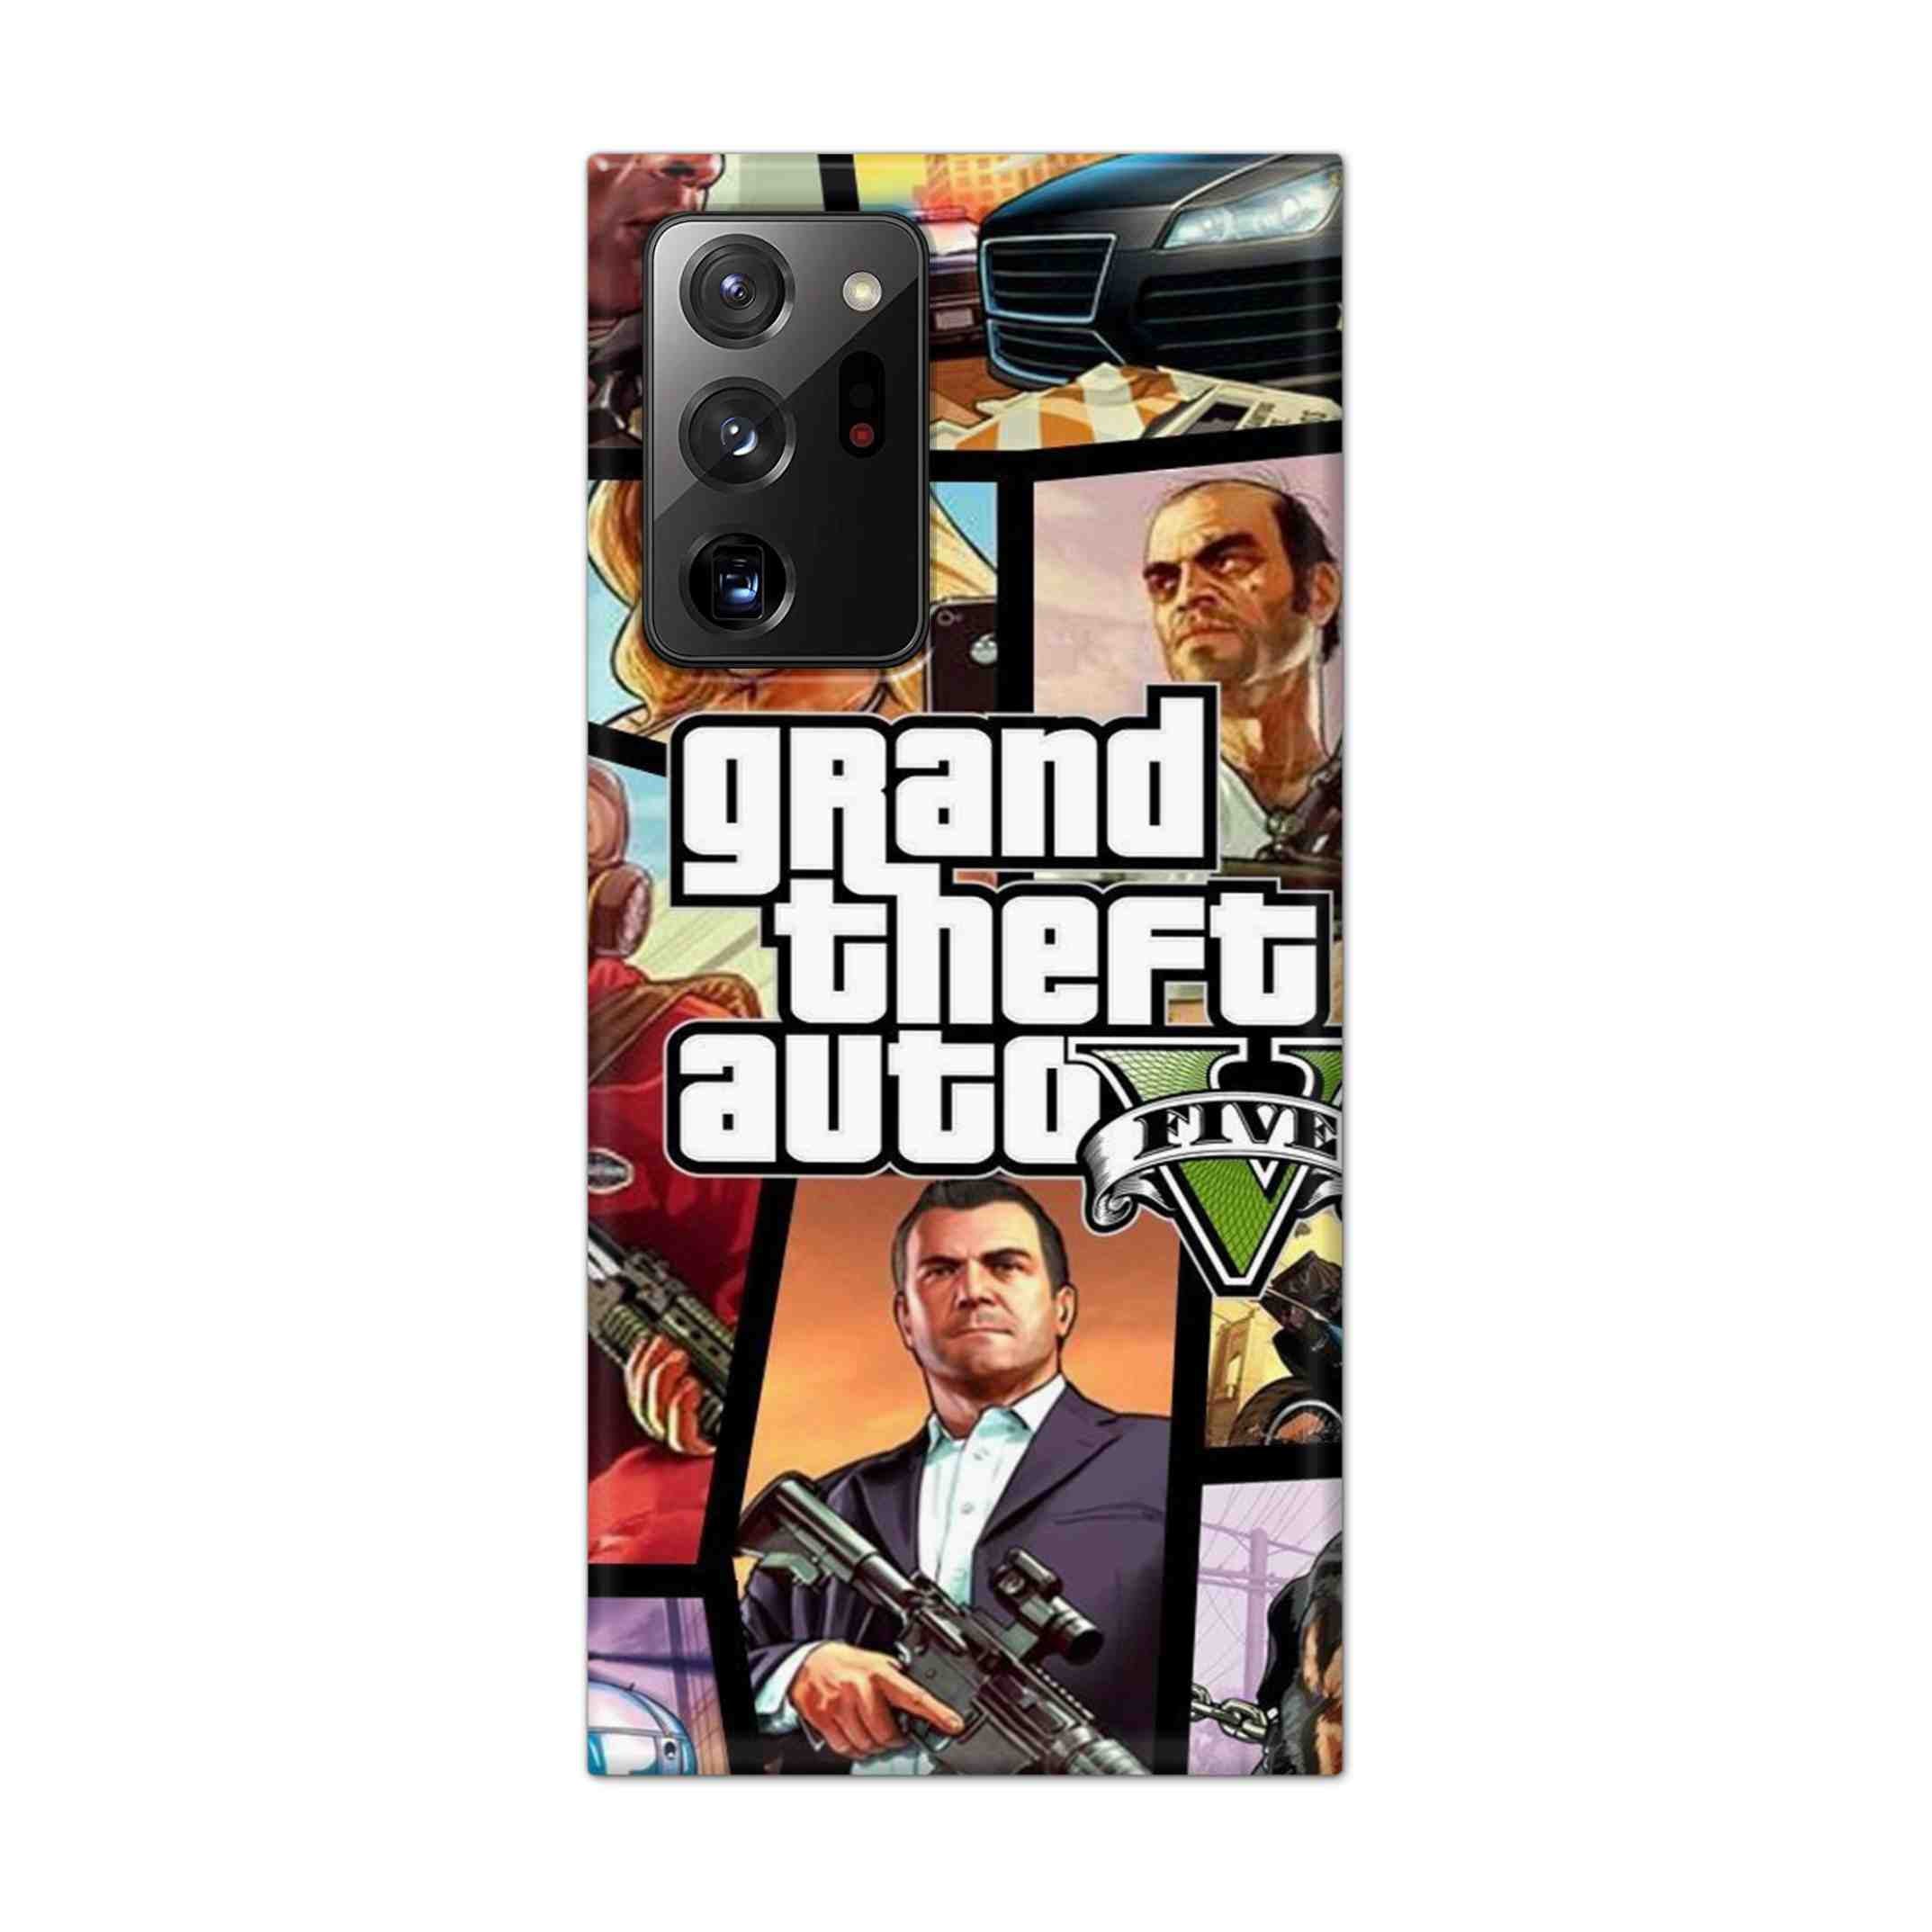 Buy Grand Theft Auto 5 Hard Back Mobile Phone Case Cover For Samsung Galaxy Note 20 Ultra Online